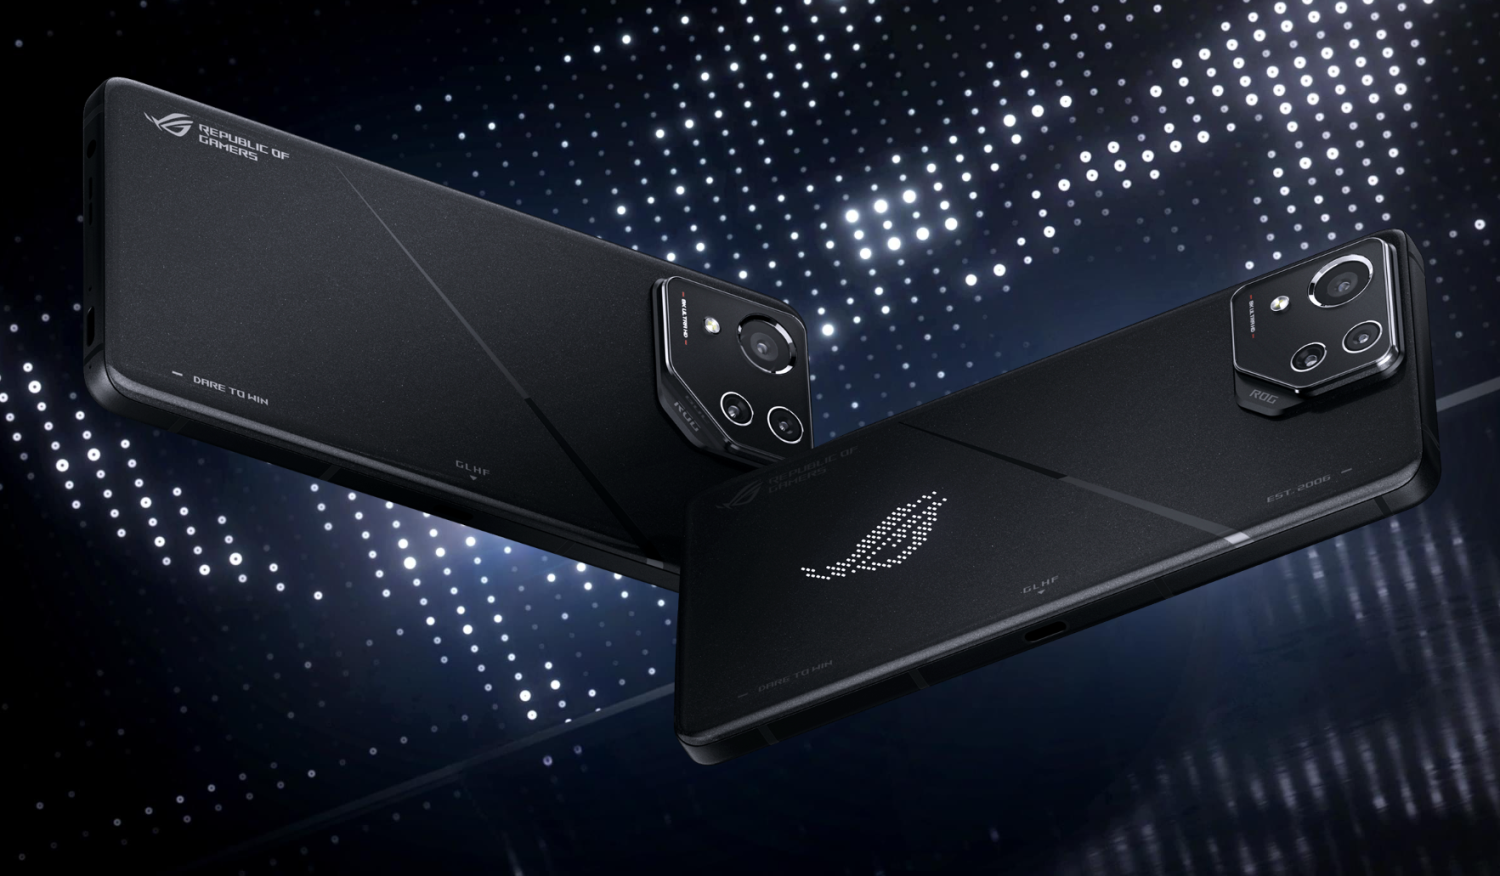 ASUS ROG 8 phone adds the one thing the gaming phone has been missing